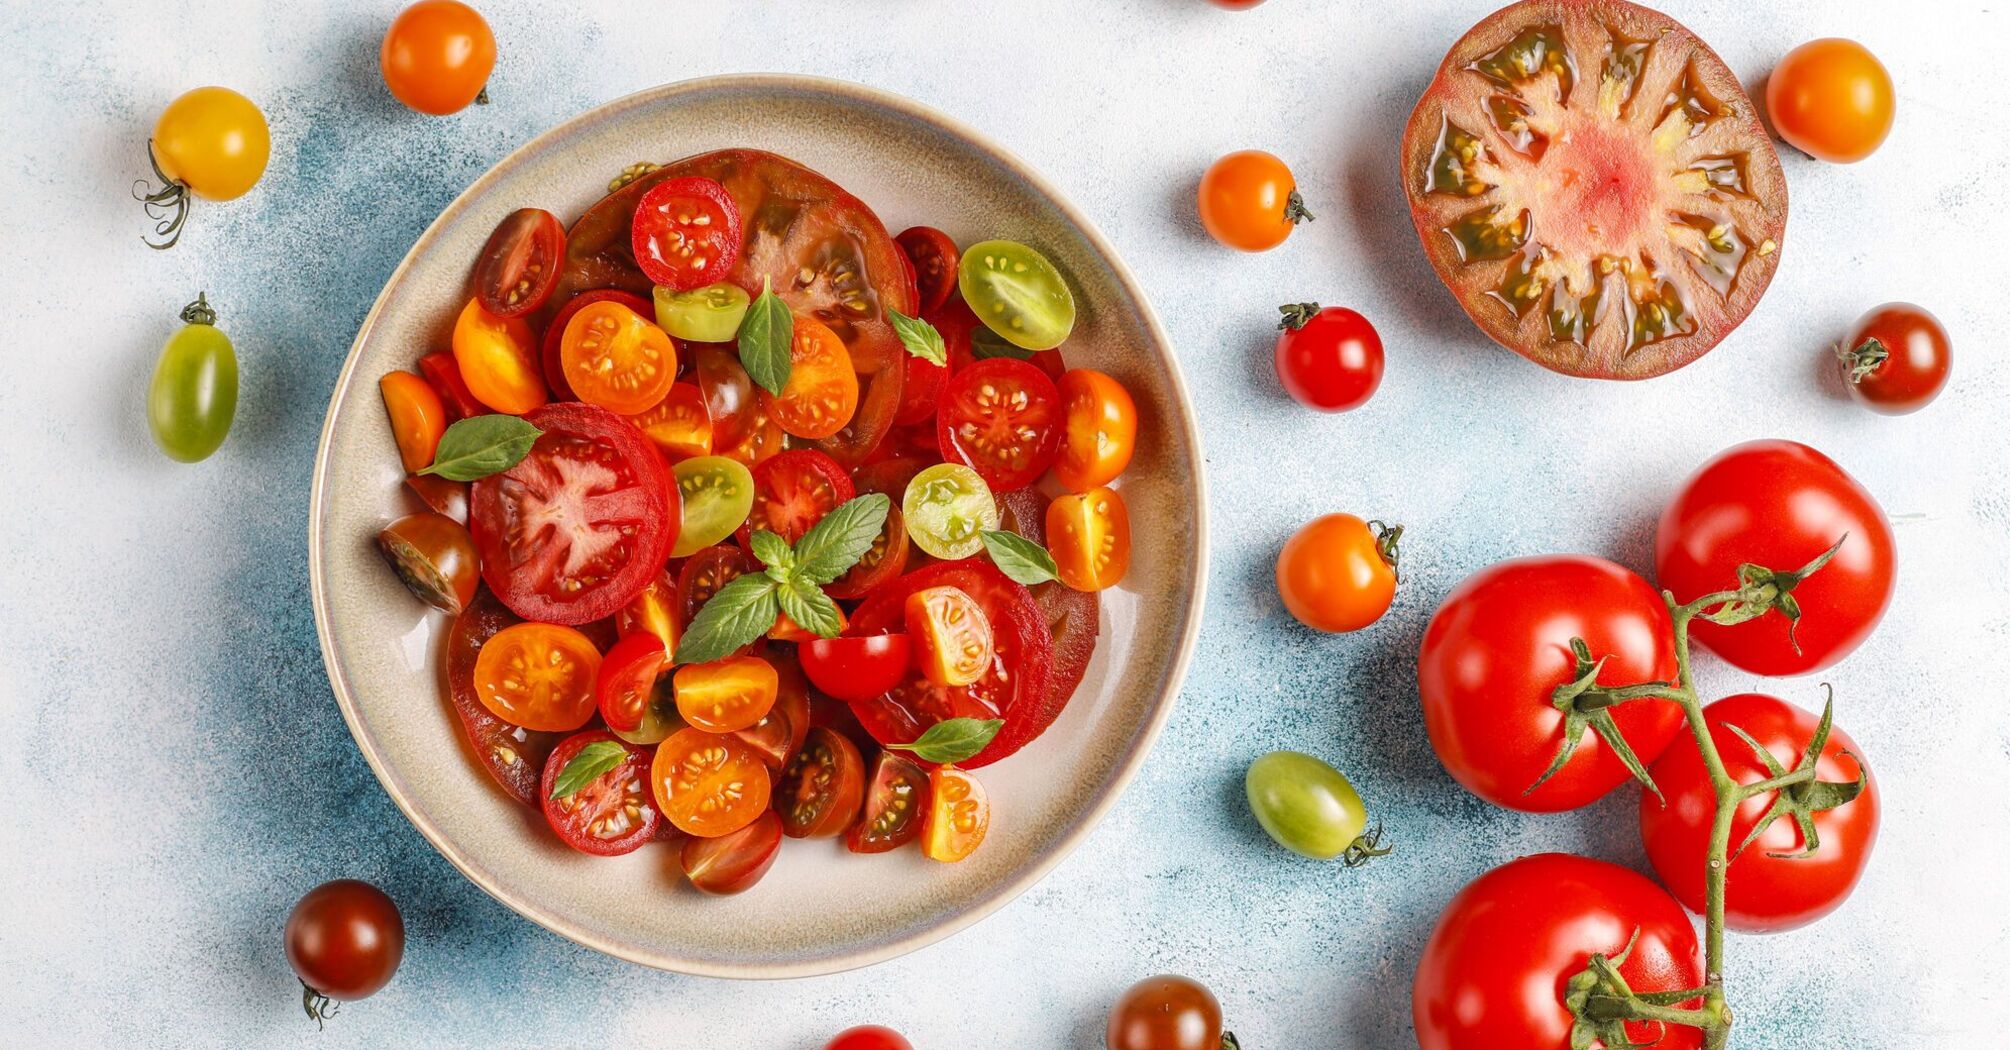 All you need is tomatoes: a savory appetizer for a barbecue in 5 minutes